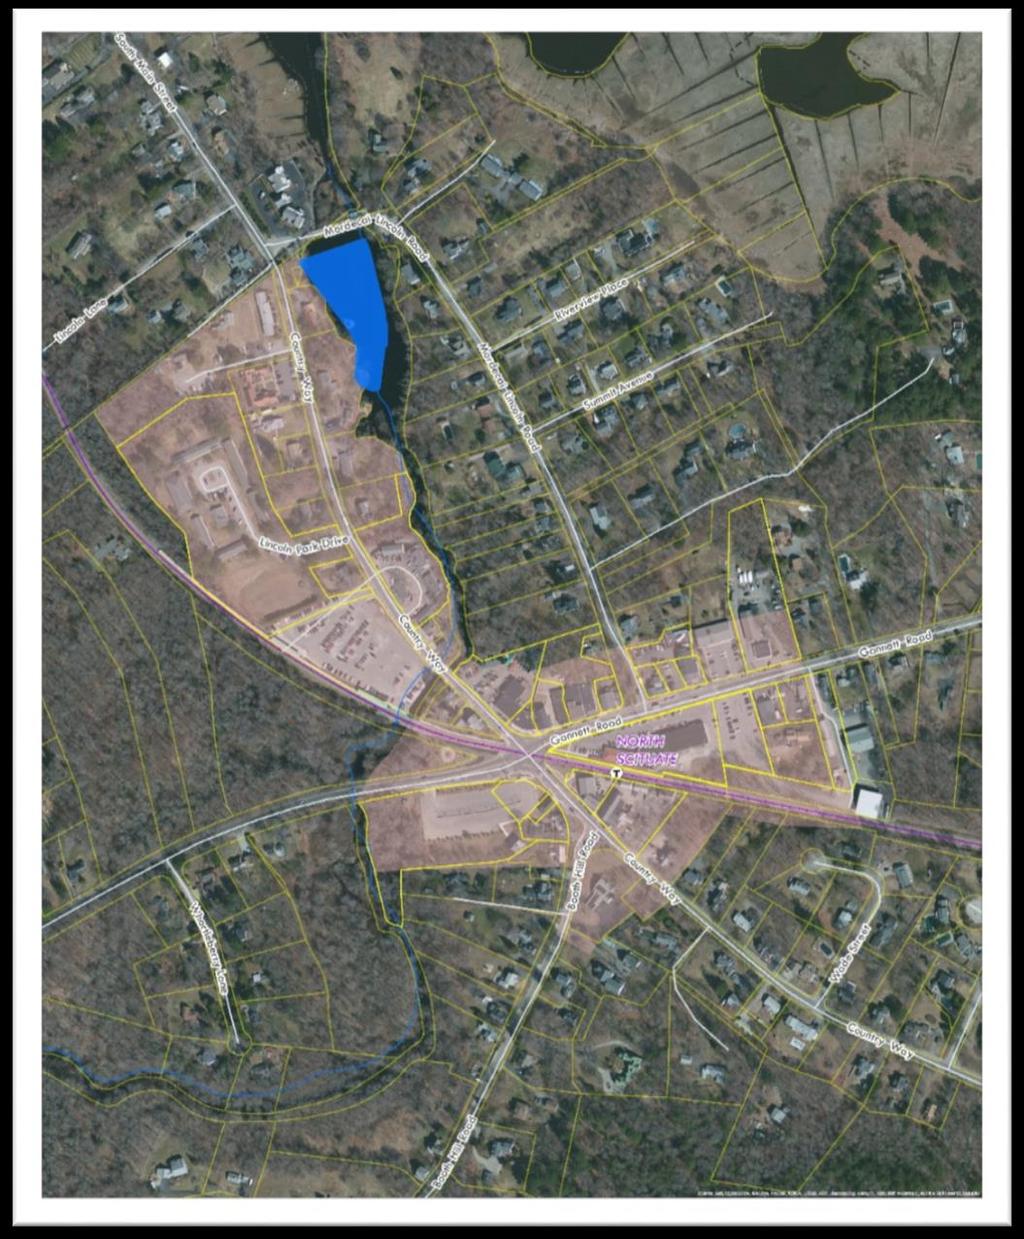 North Scituate Area Plan Residential Multifamily T Medium/High Density Mixed- Use, Transit- Oriented Village Center Support medium/high density mixed use along main corridor - Henry Turner